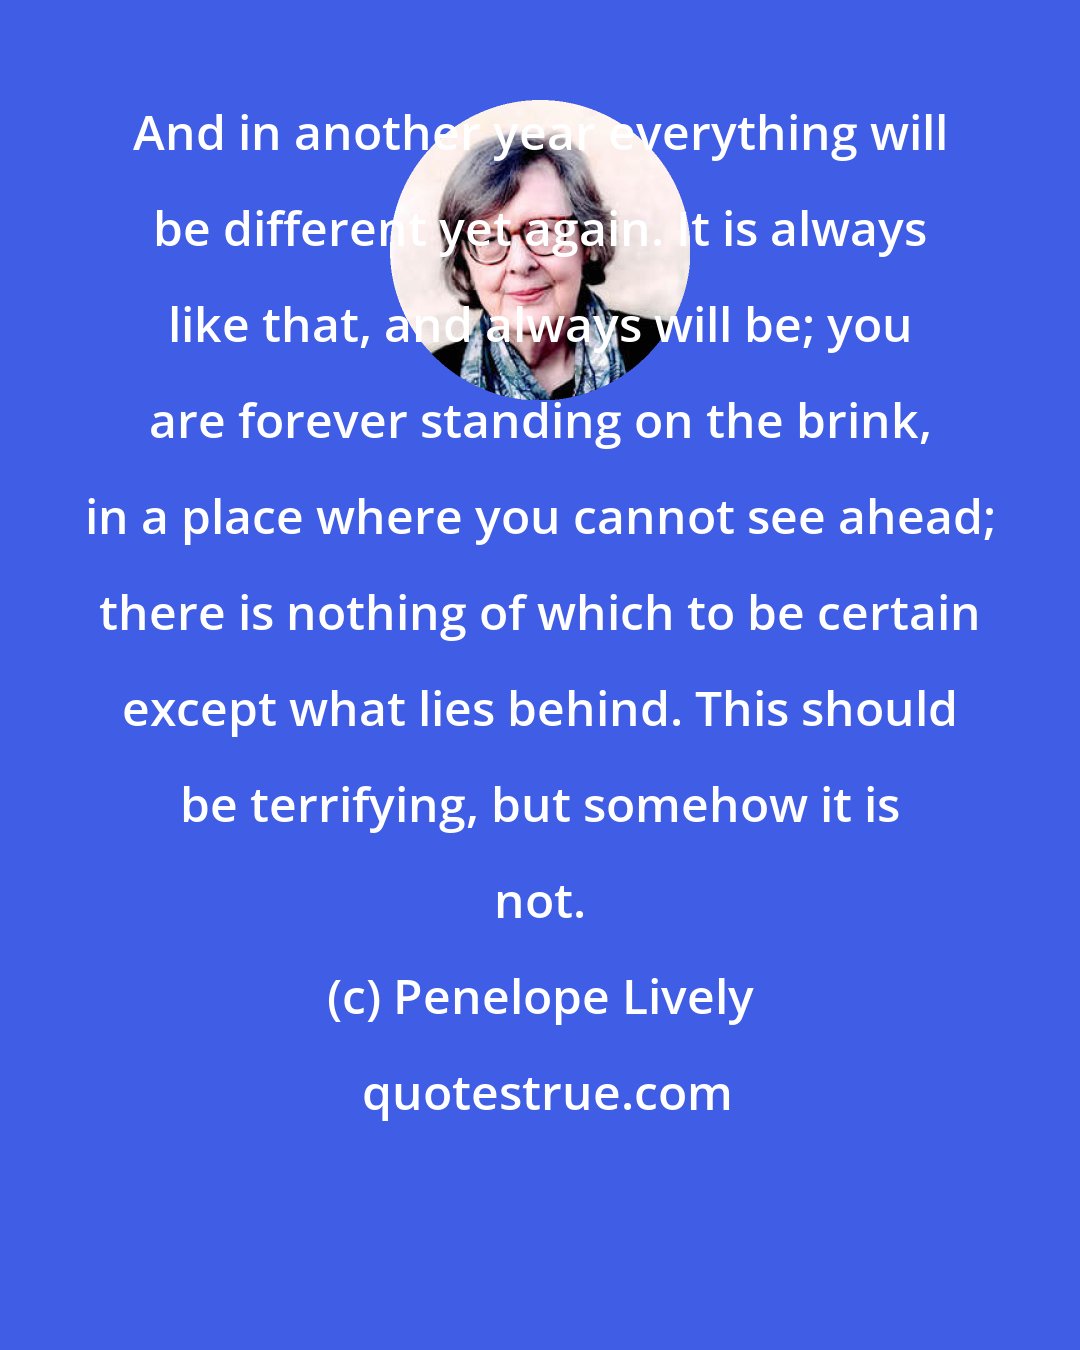 Penelope Lively: And in another year everything will be different yet again. It is always like that, and always will be; you are forever standing on the brink, in a place where you cannot see ahead; there is nothing of which to be certain except what lies behind. This should be terrifying, but somehow it is not.